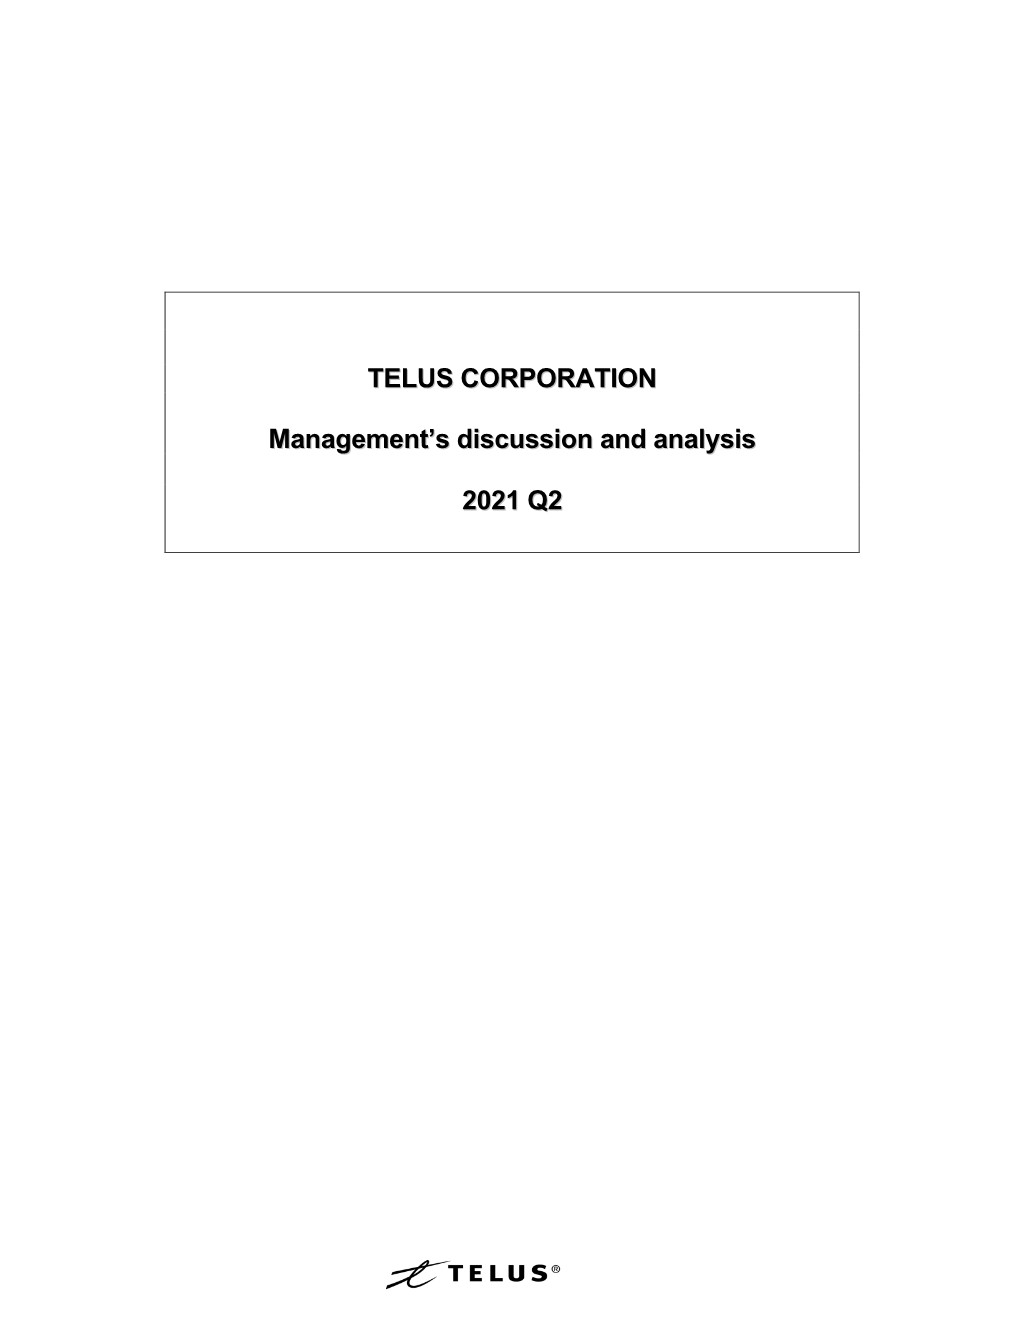 TELUS CORPORATION Management's Discussion and Analysis 2021 Q2